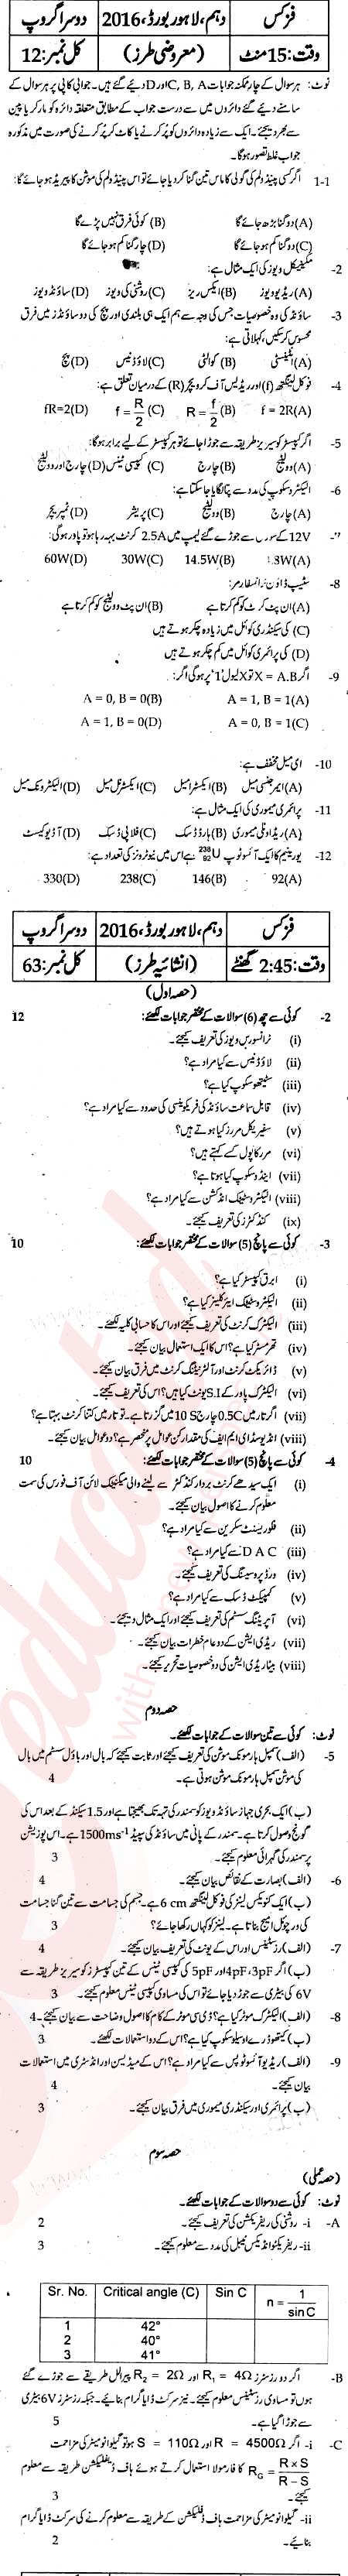 Physics 10th class Past Paper Group 2 BISE Lahore 2016